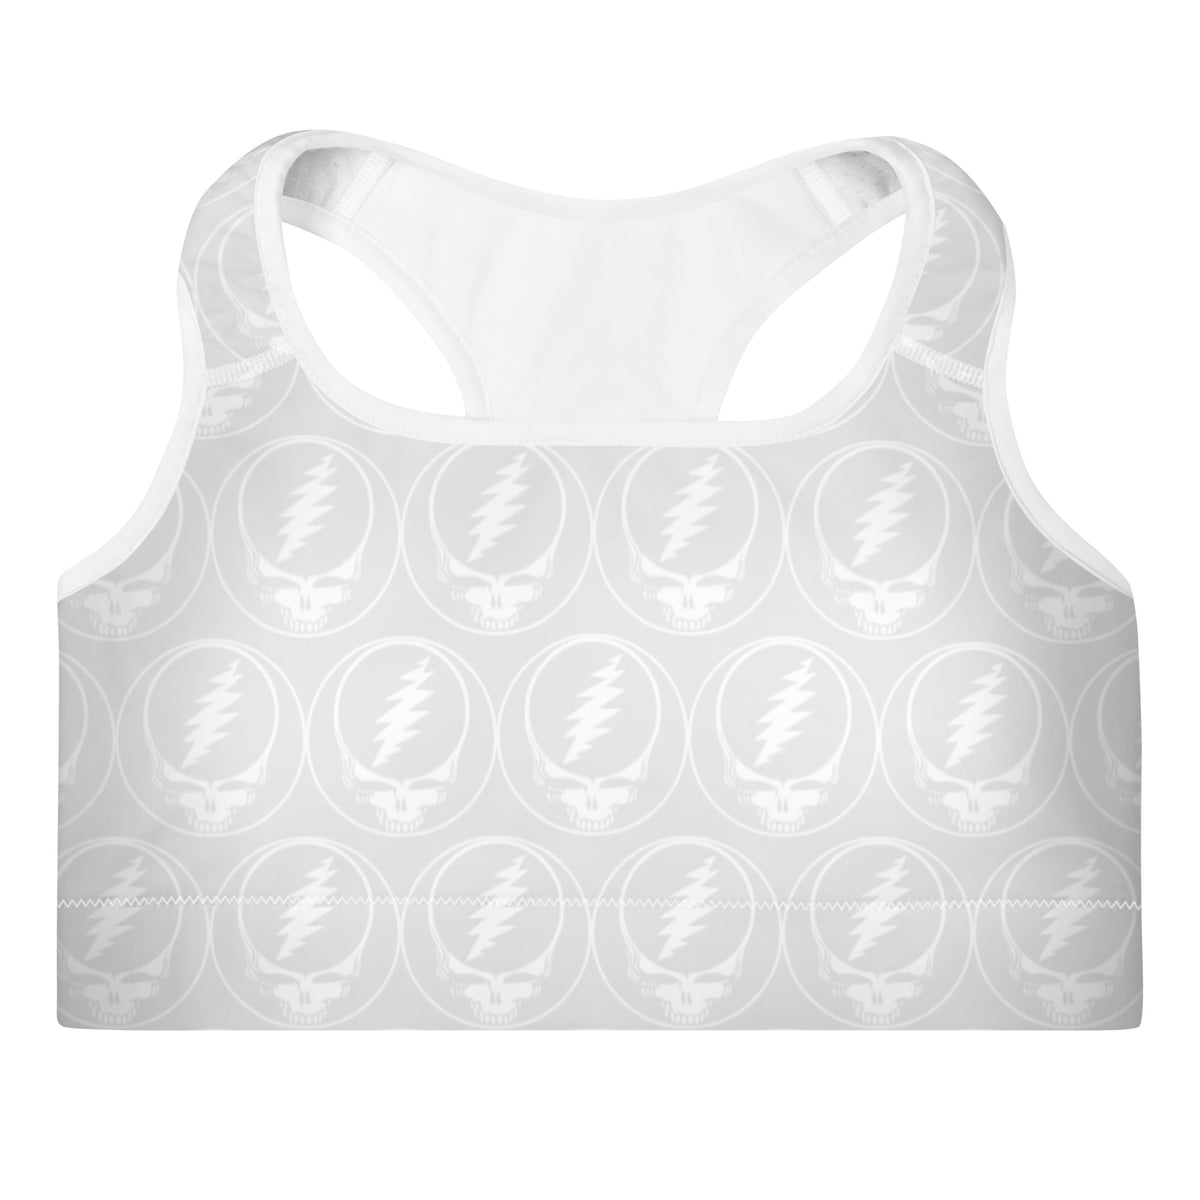 Ice Grey and White Stealie Sports Bra - Section 119